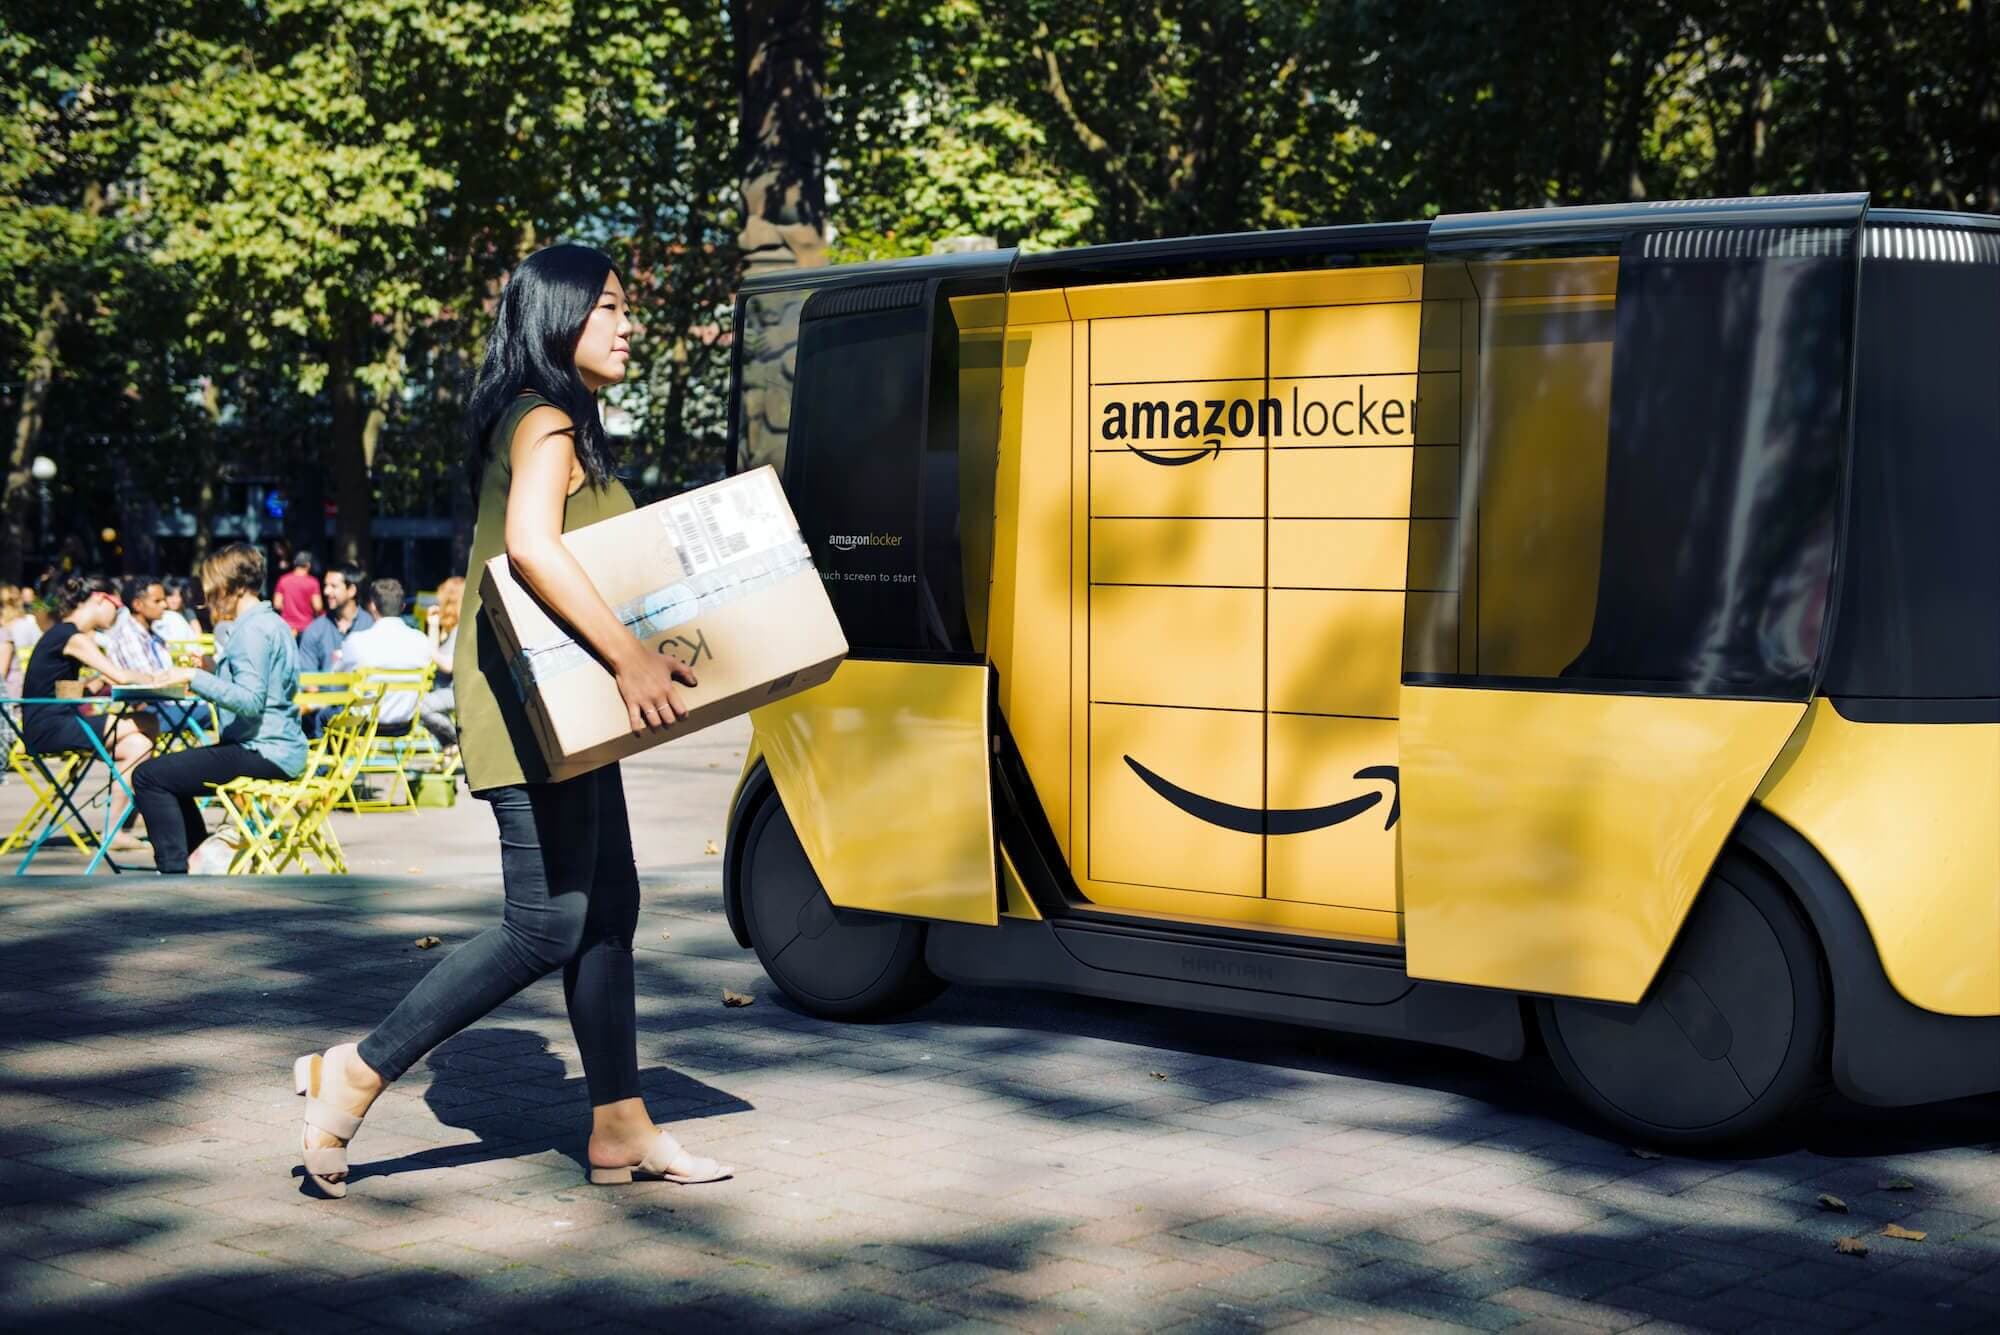 Women holding a package walking up to Hannah with Amazon locker insert